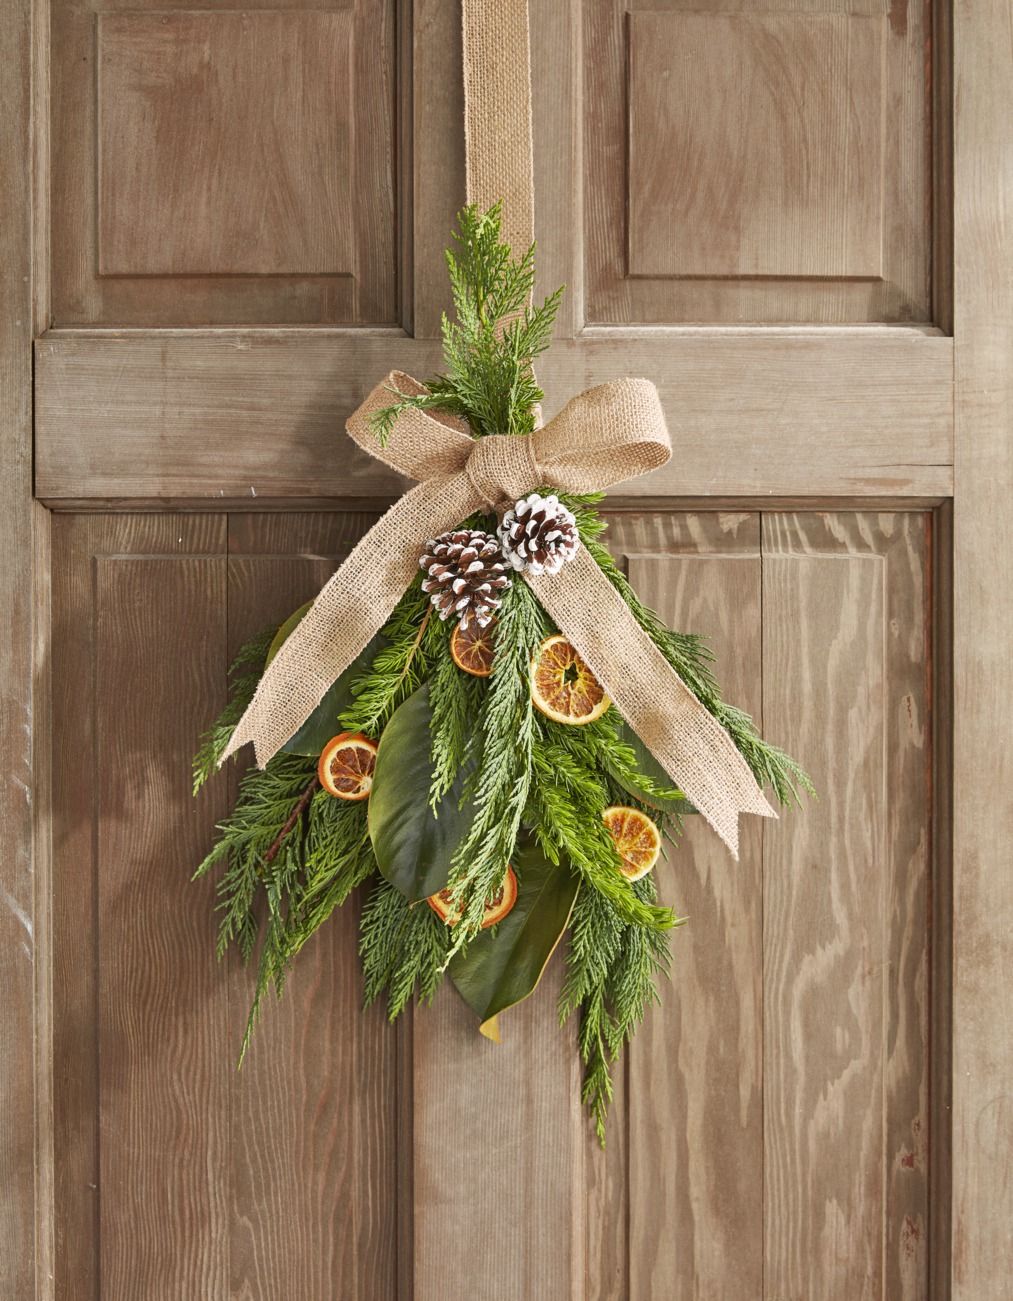 Garland Christmas Gate Ornaments Decoration Christmas out door behind door 